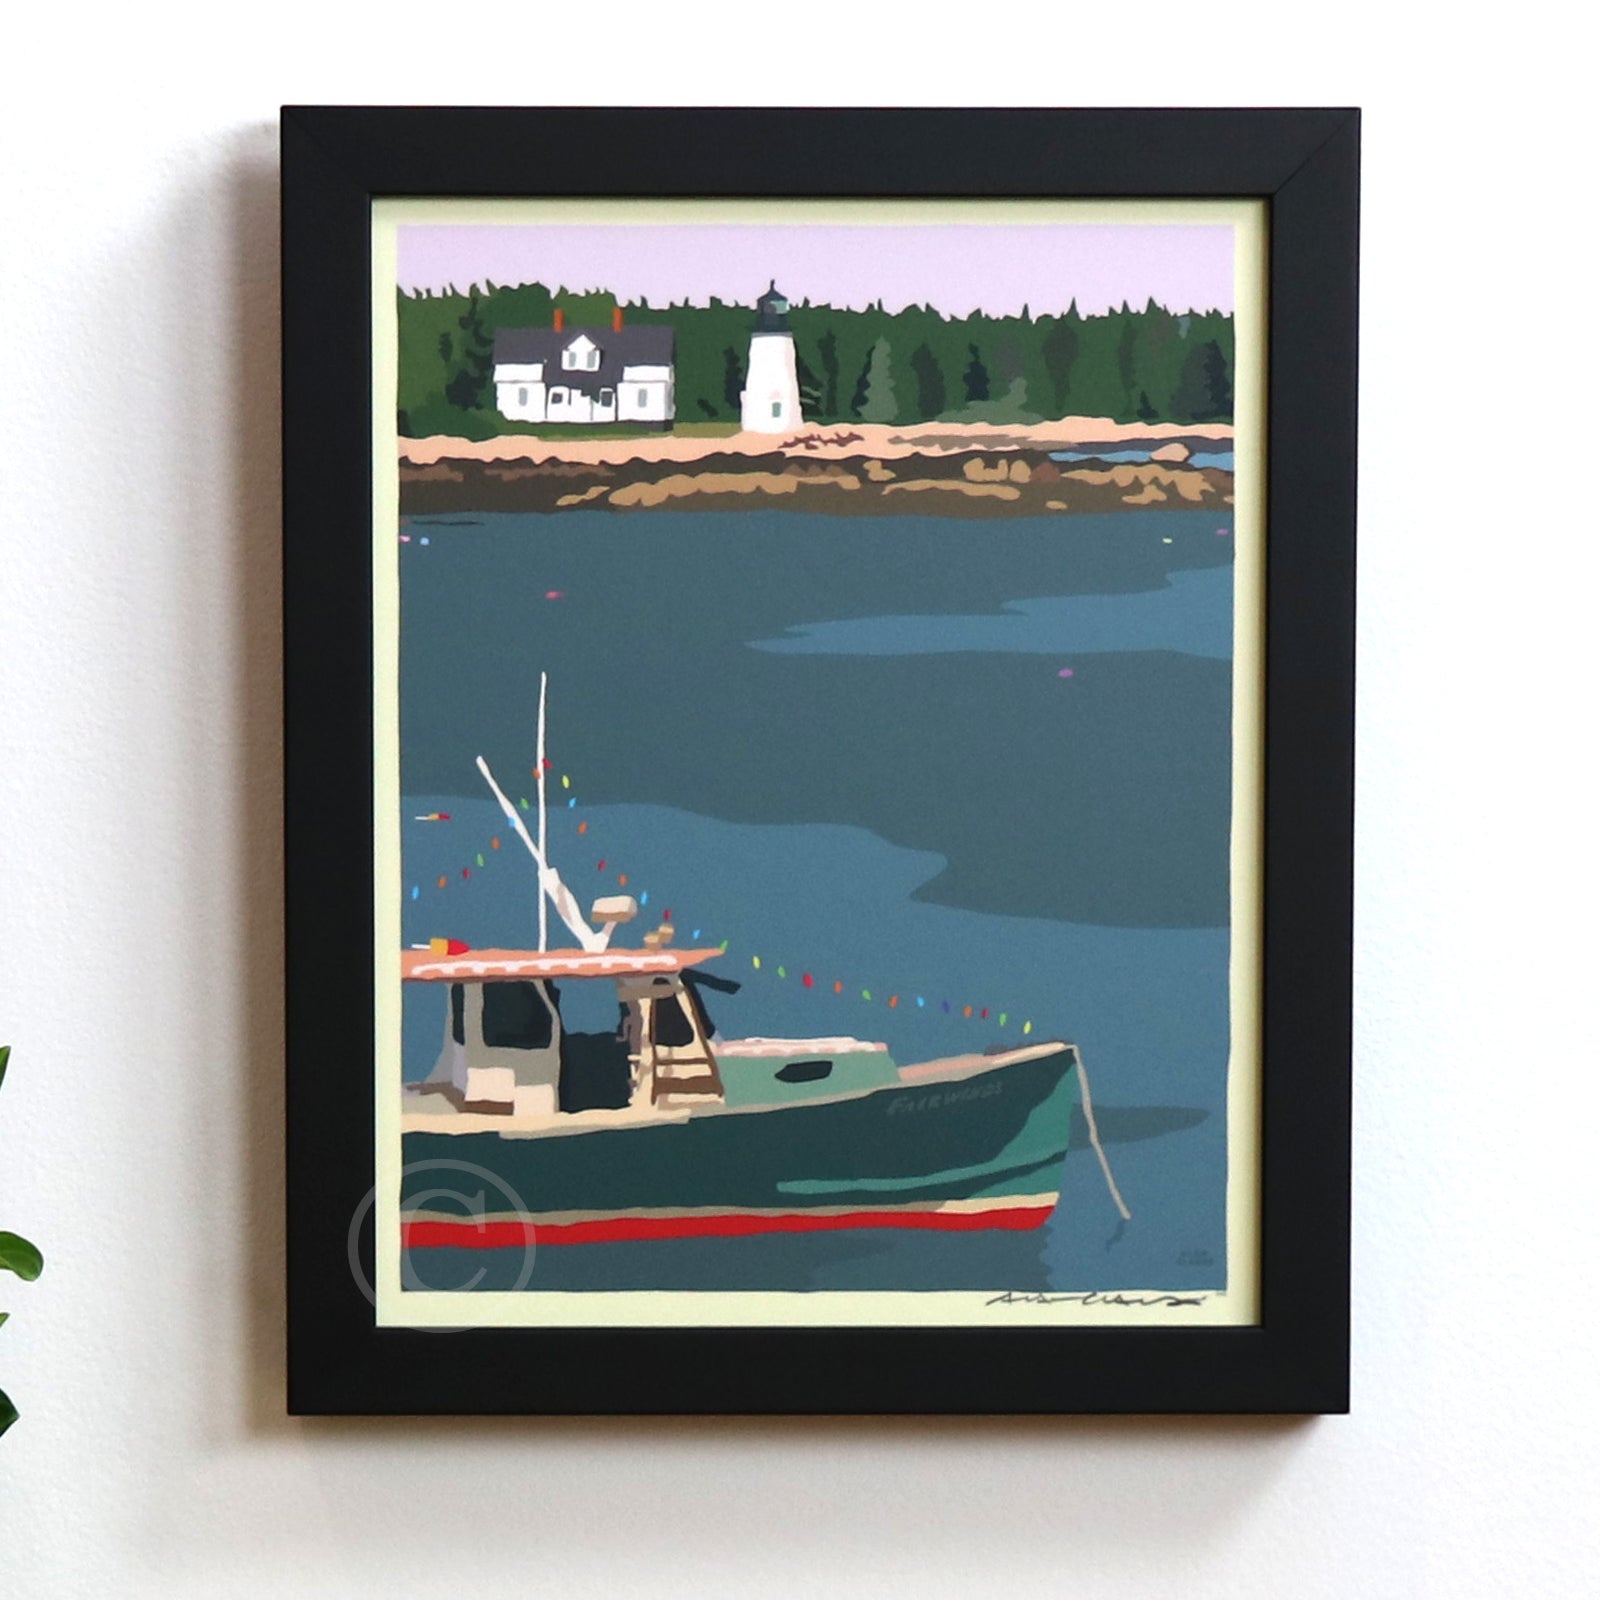 Silent Night in Prospect Harbor Art Print 8" x 10" Framed Wall Poster By Alan Claude - Maine